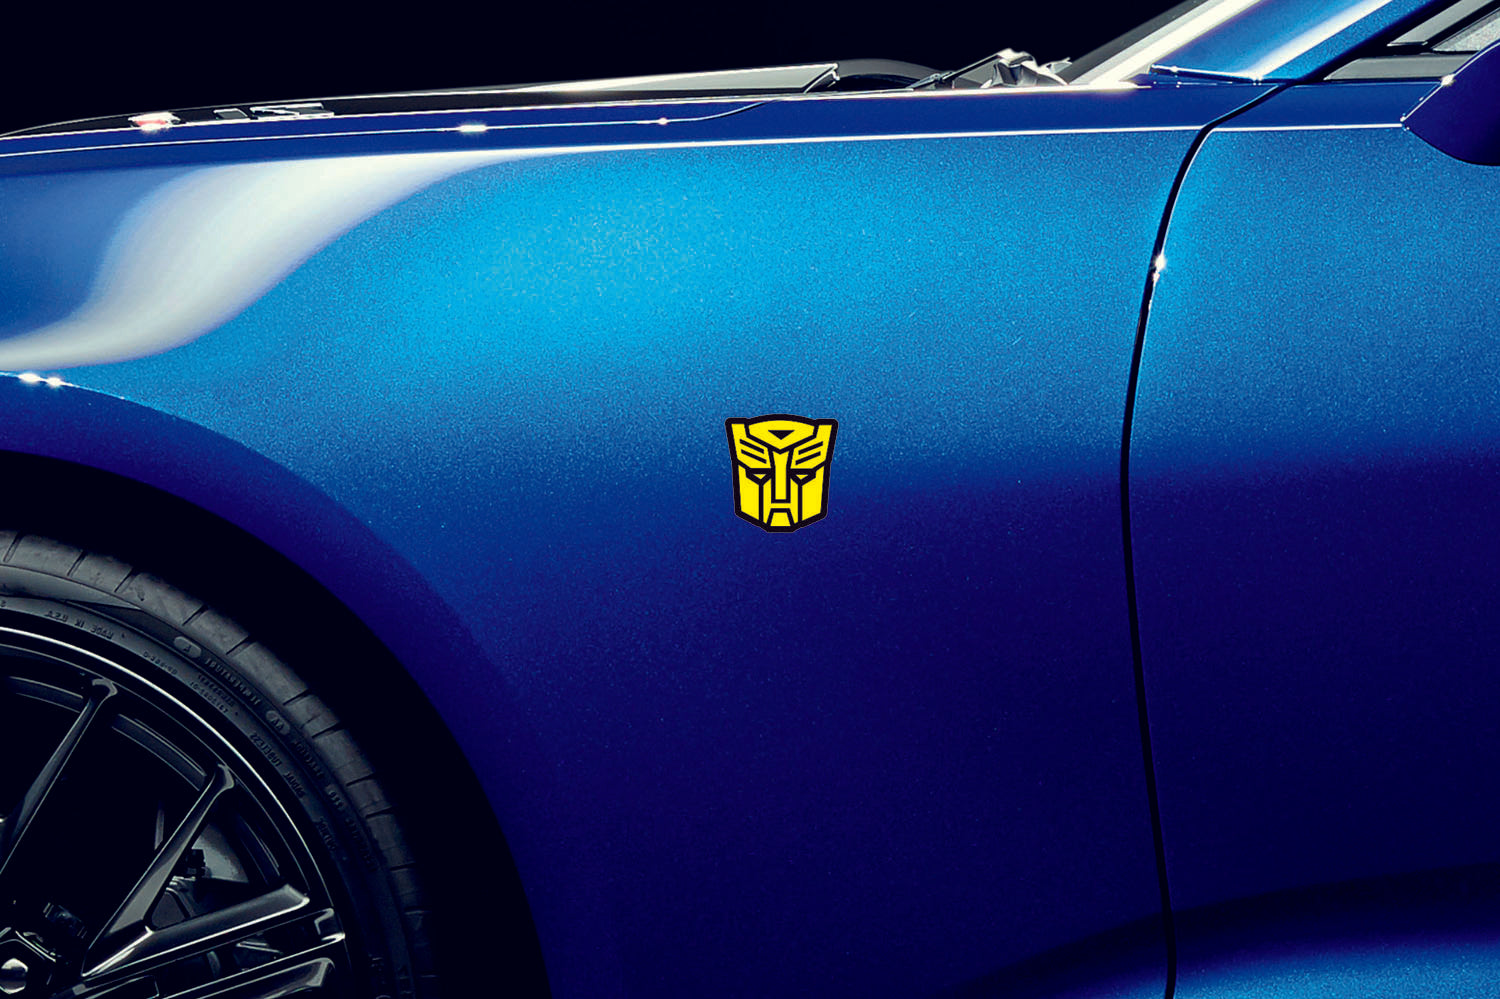 Chevrolet emblem for fenders with Autobot logo